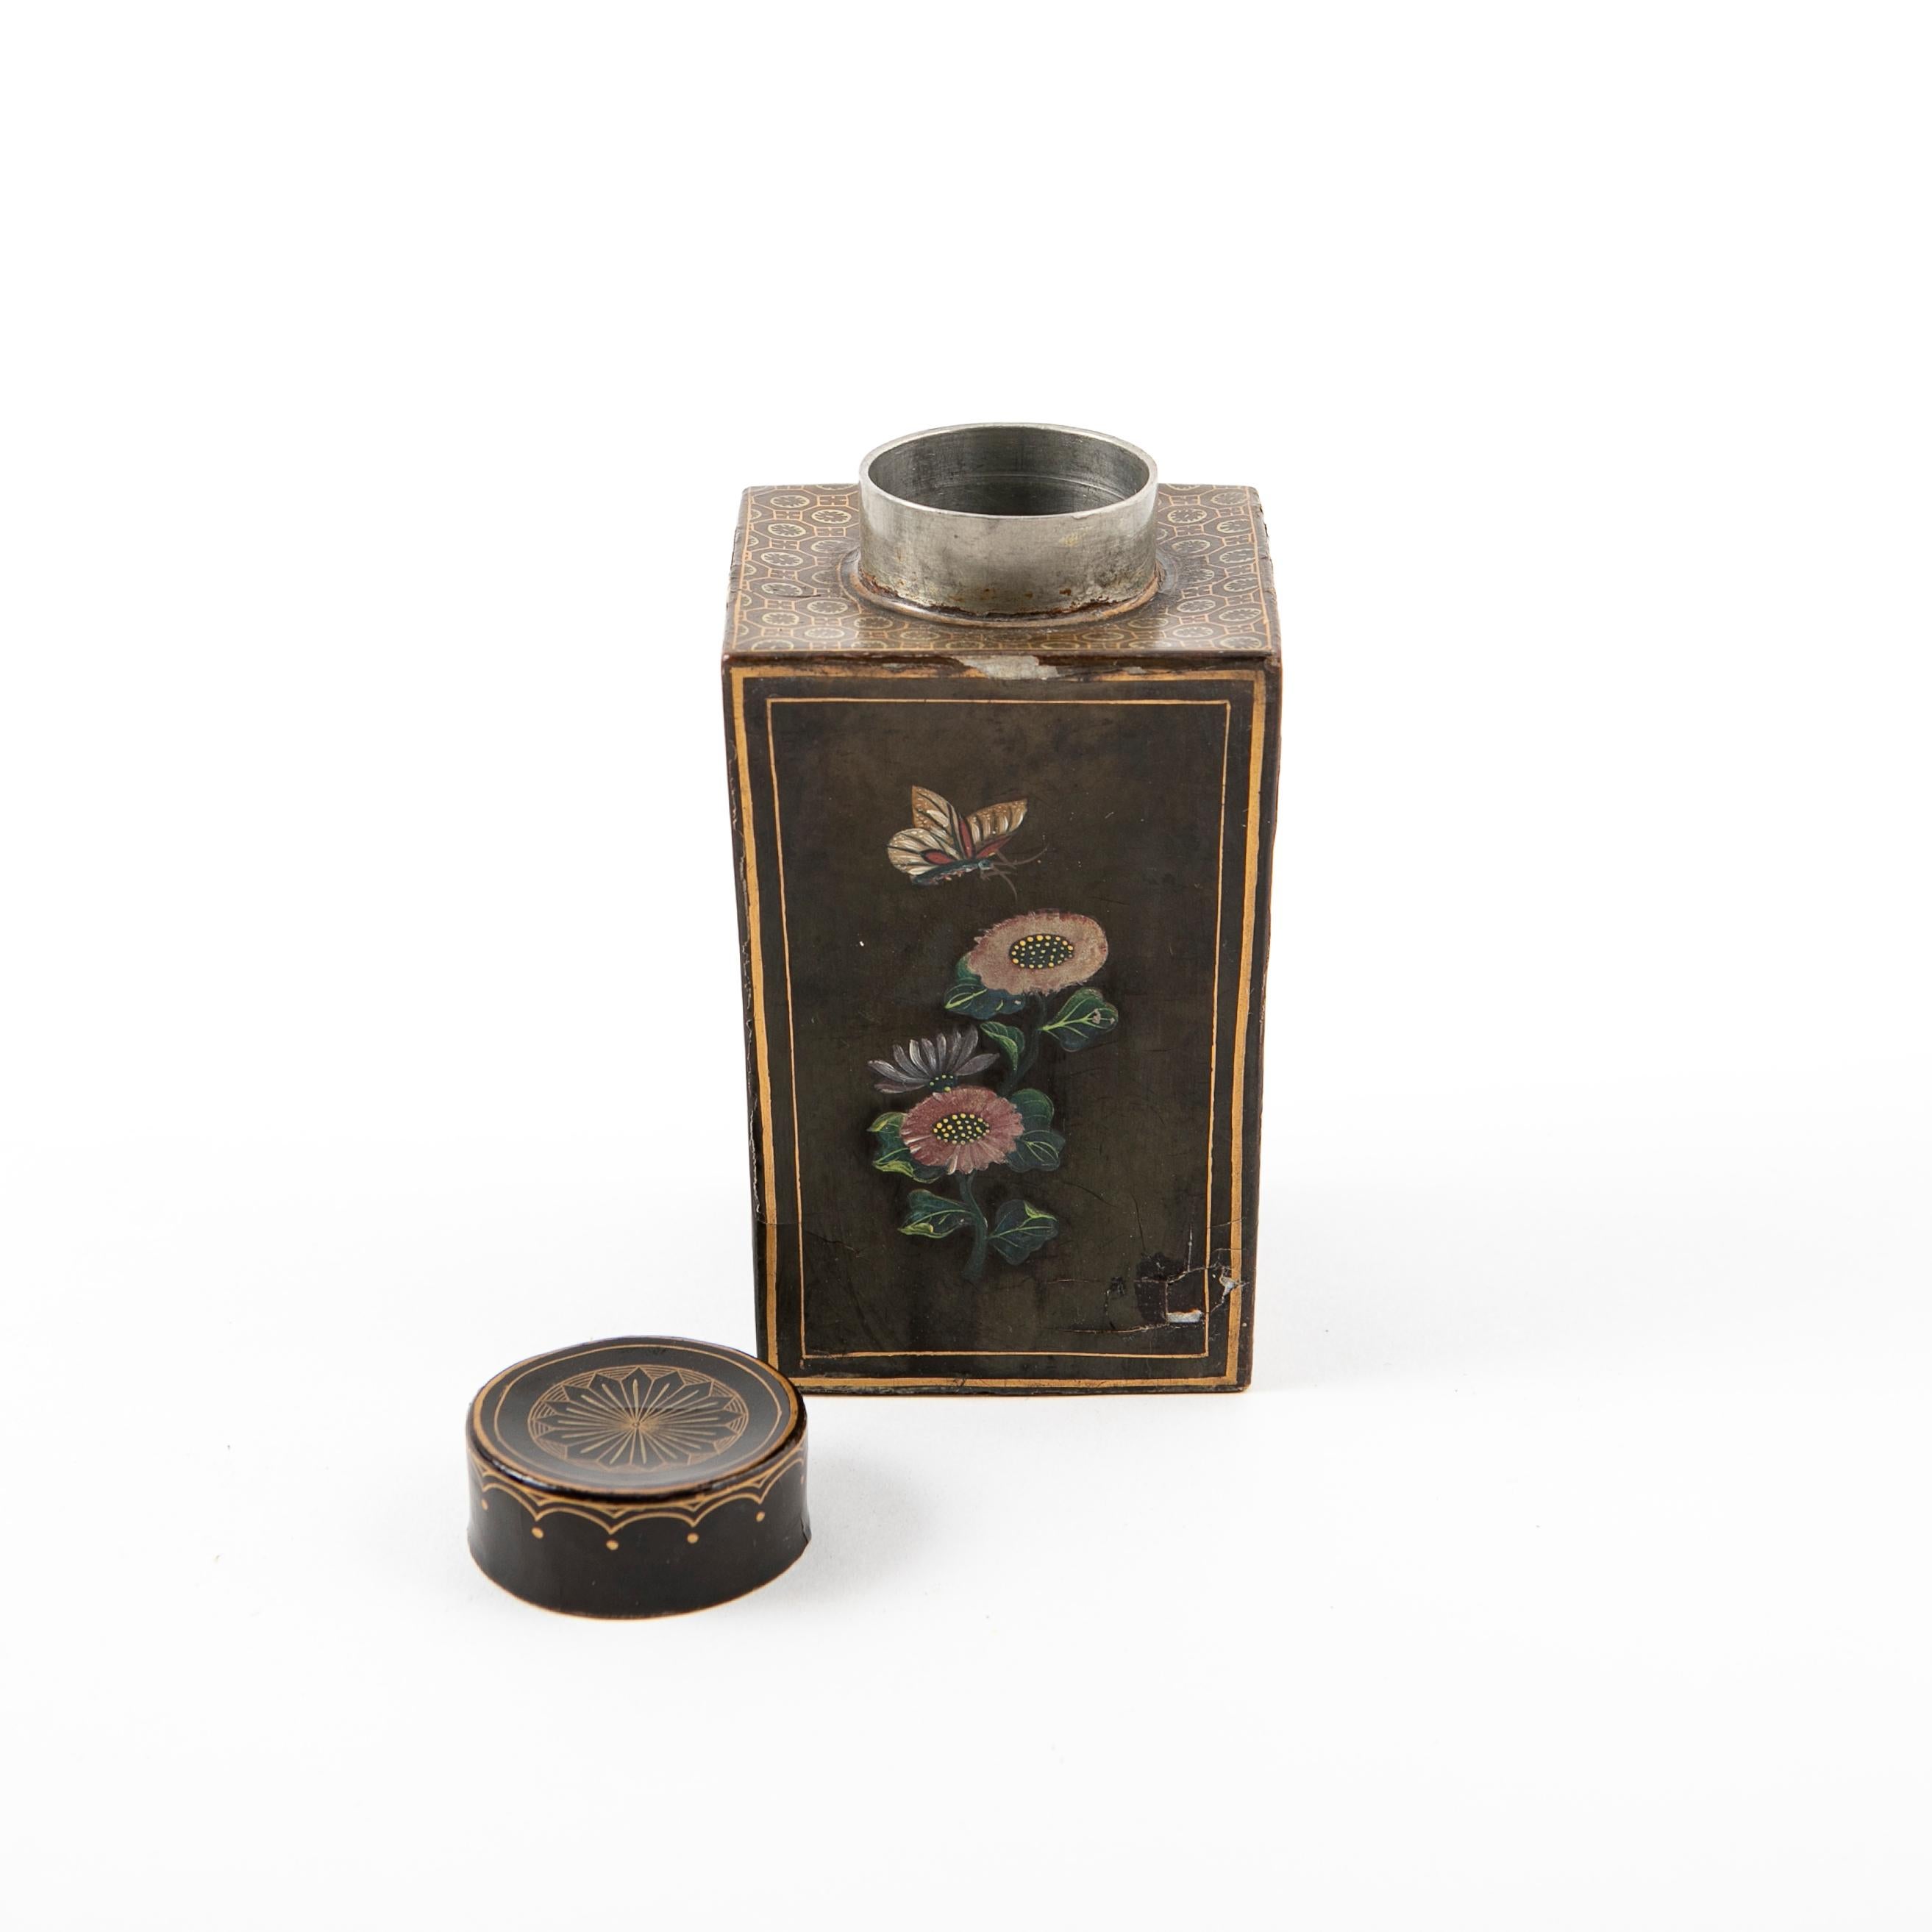 Pewter Tea Caddy in Black Lacquer with Floral Decorations